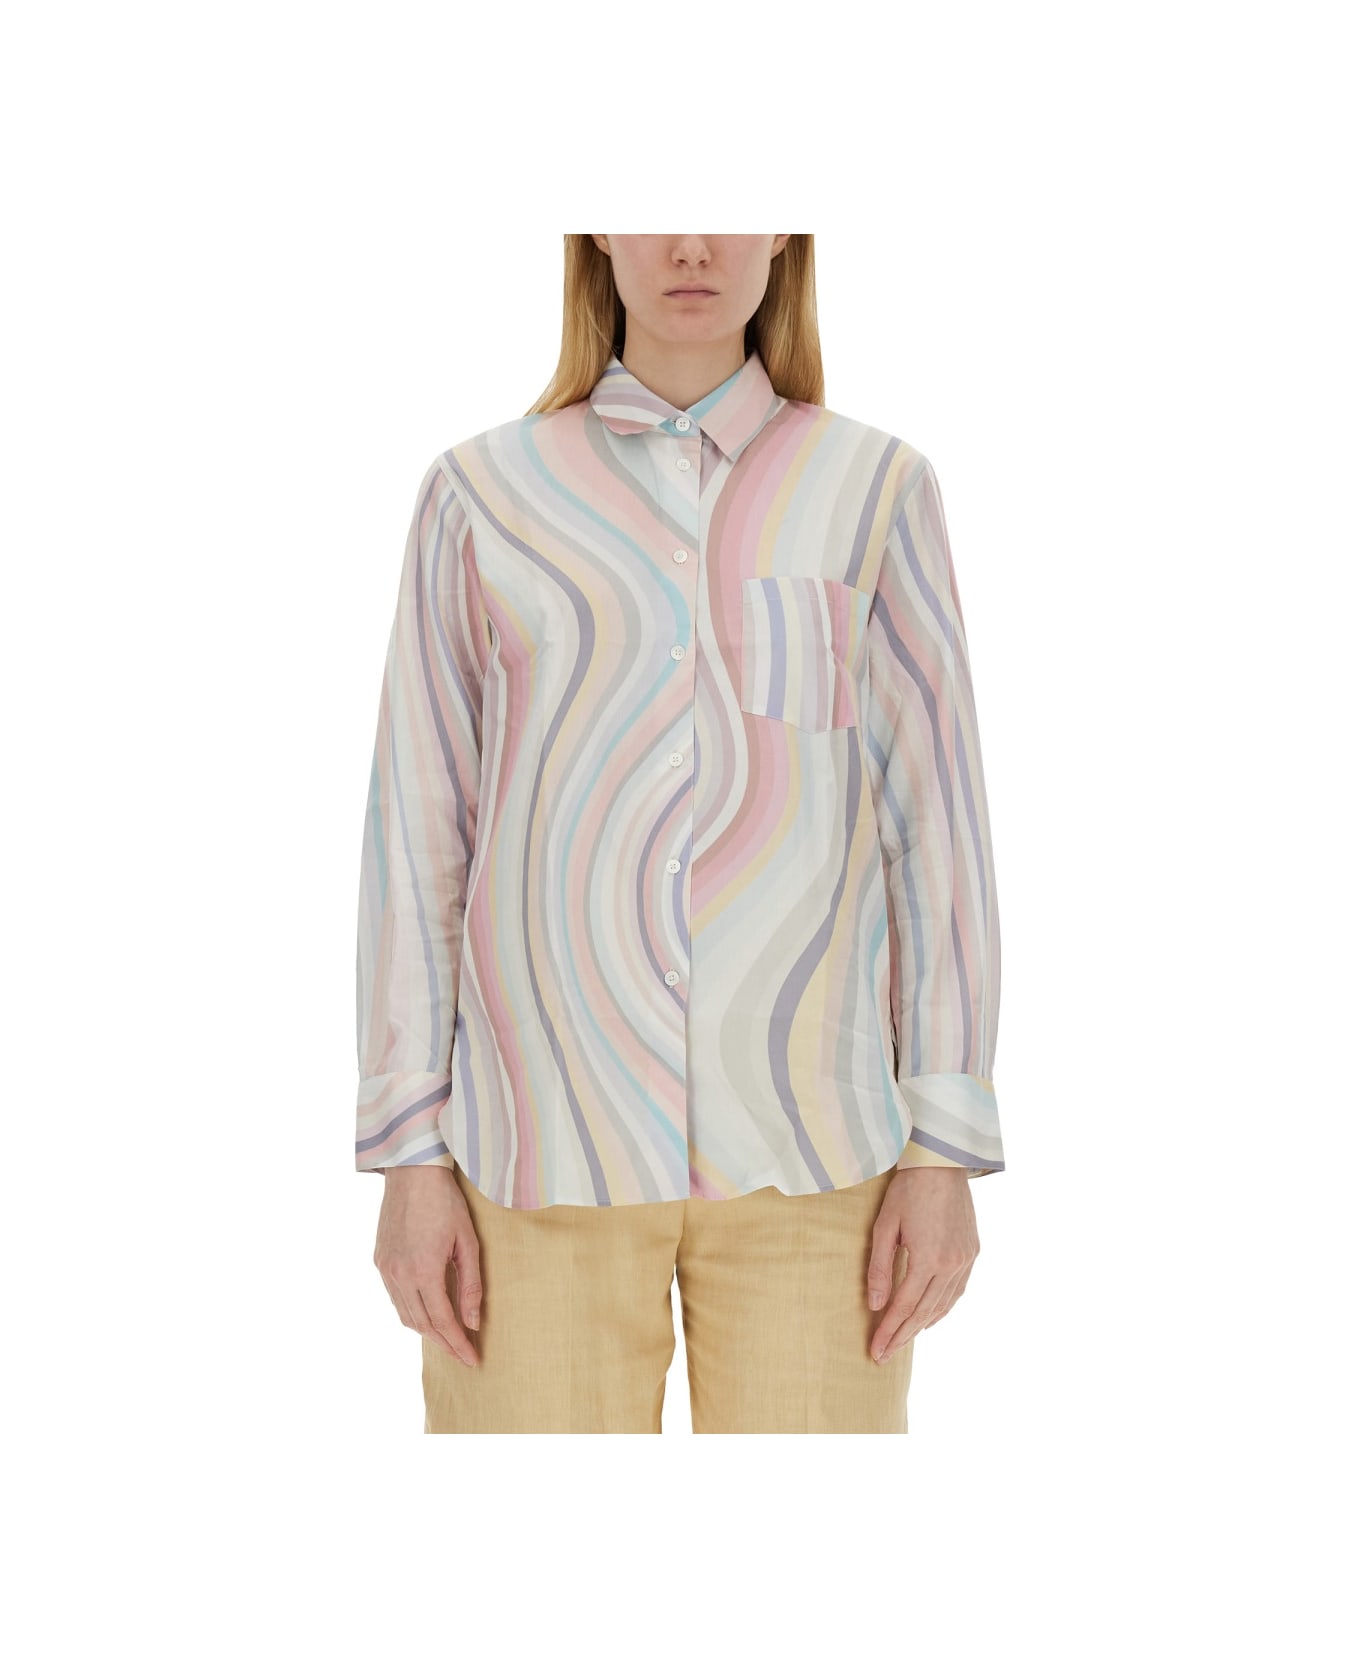 PS by Paul Smith 'faded Swirl' Shirt - MULTICOLOUR シャツ